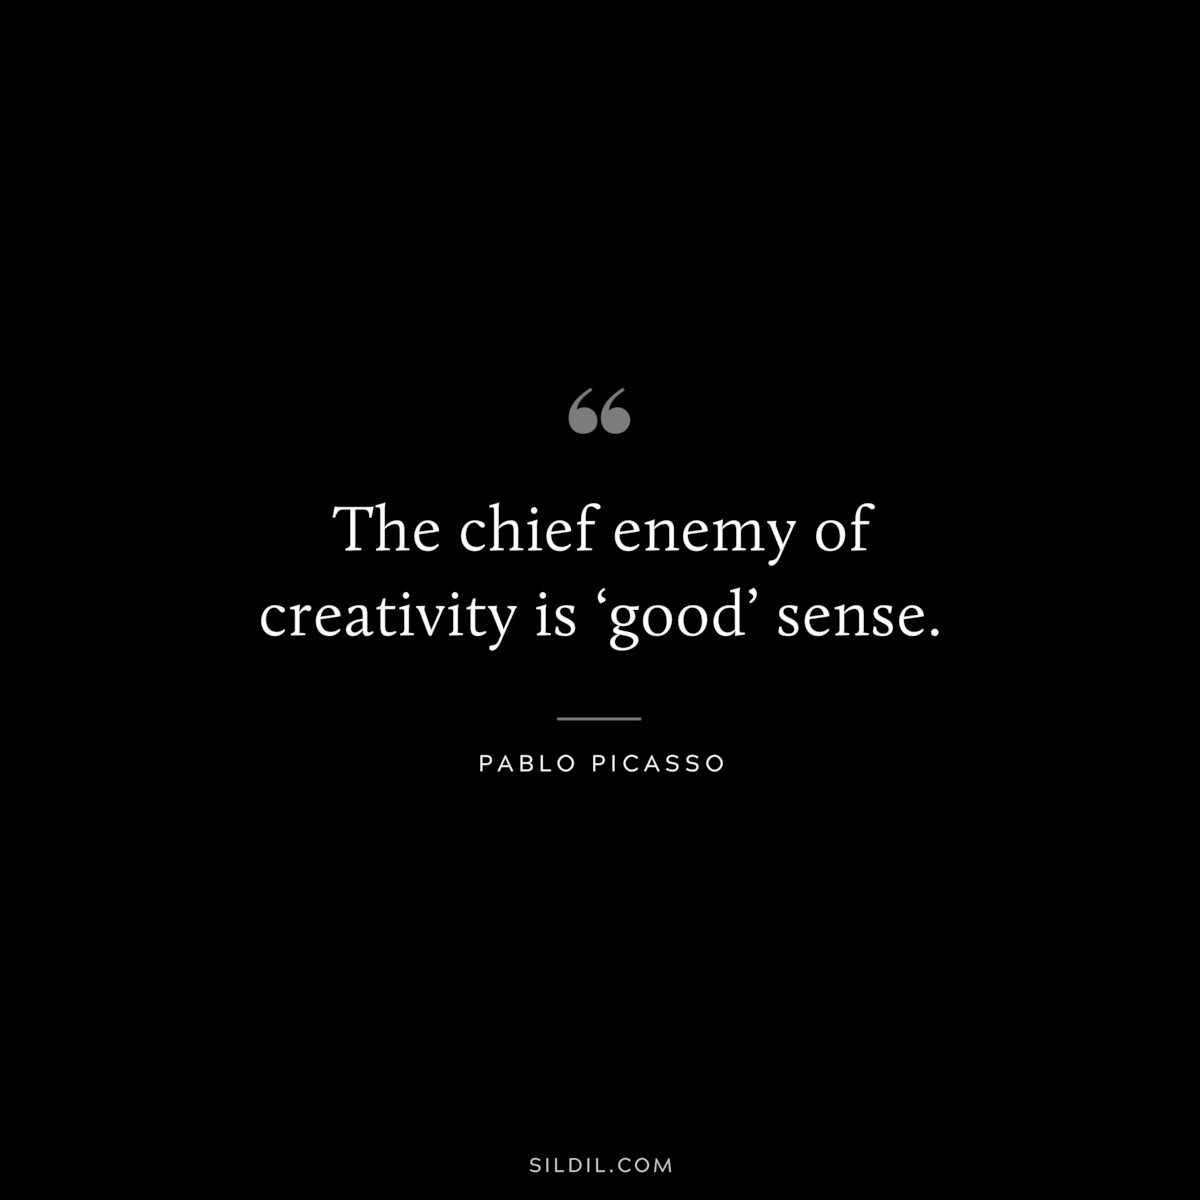 The chief enemy of creativity is ‘good’ sense. ― Pablo Picasso